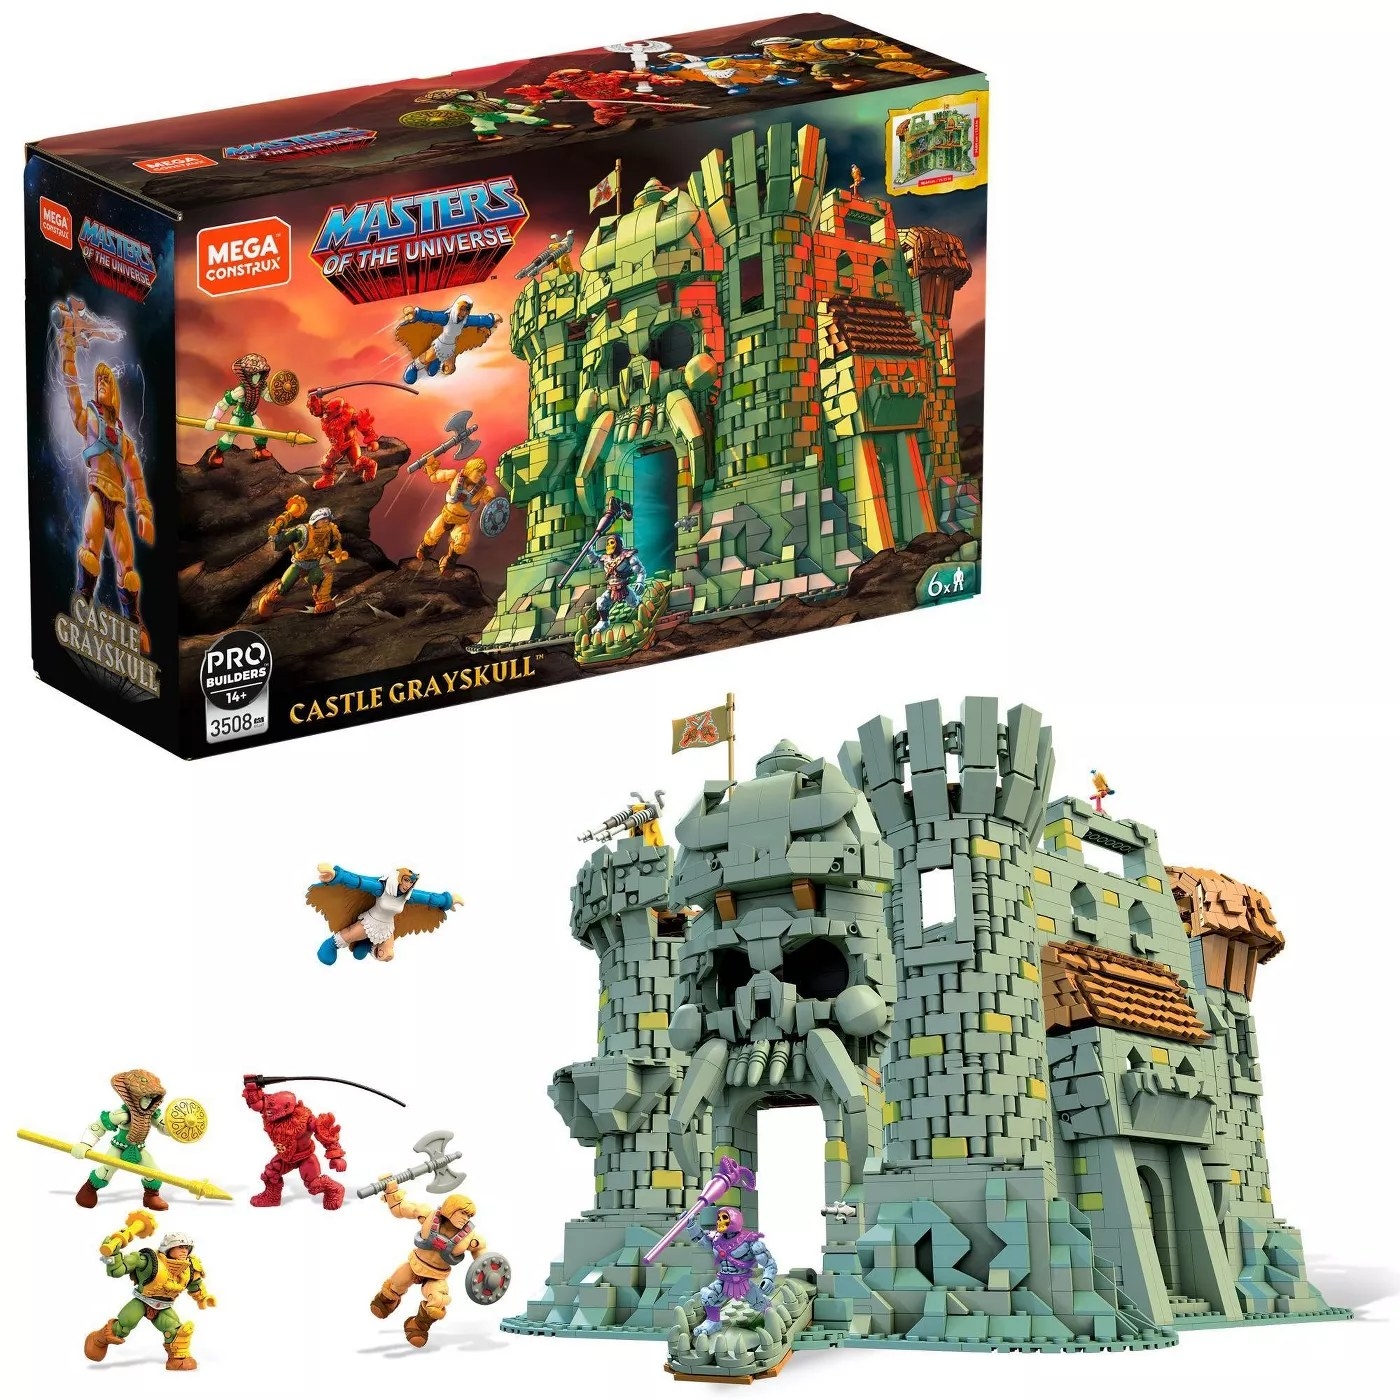 Mega Construx Masters of the Universe Castle Grayskull set for pro-builders who are 14+